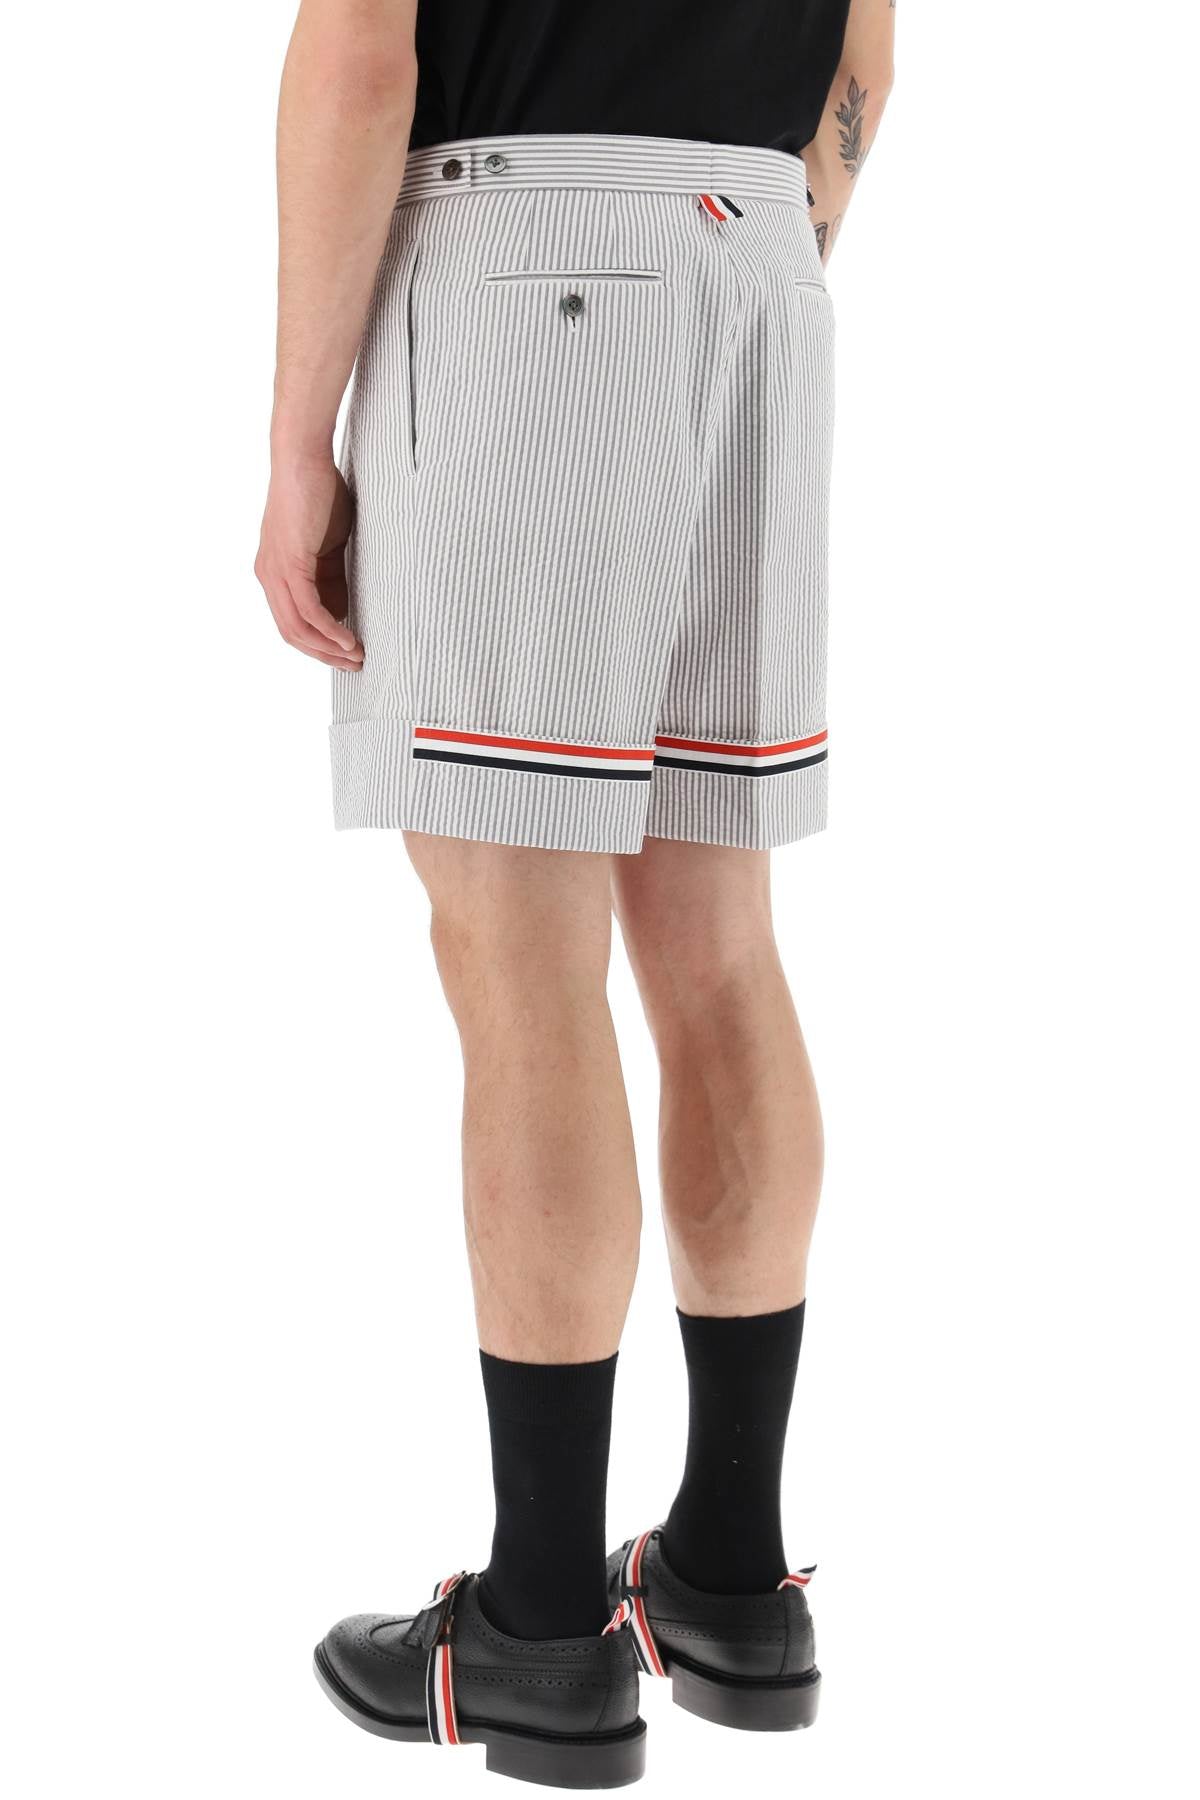 Thom browne striped shorts with tricolor details-2